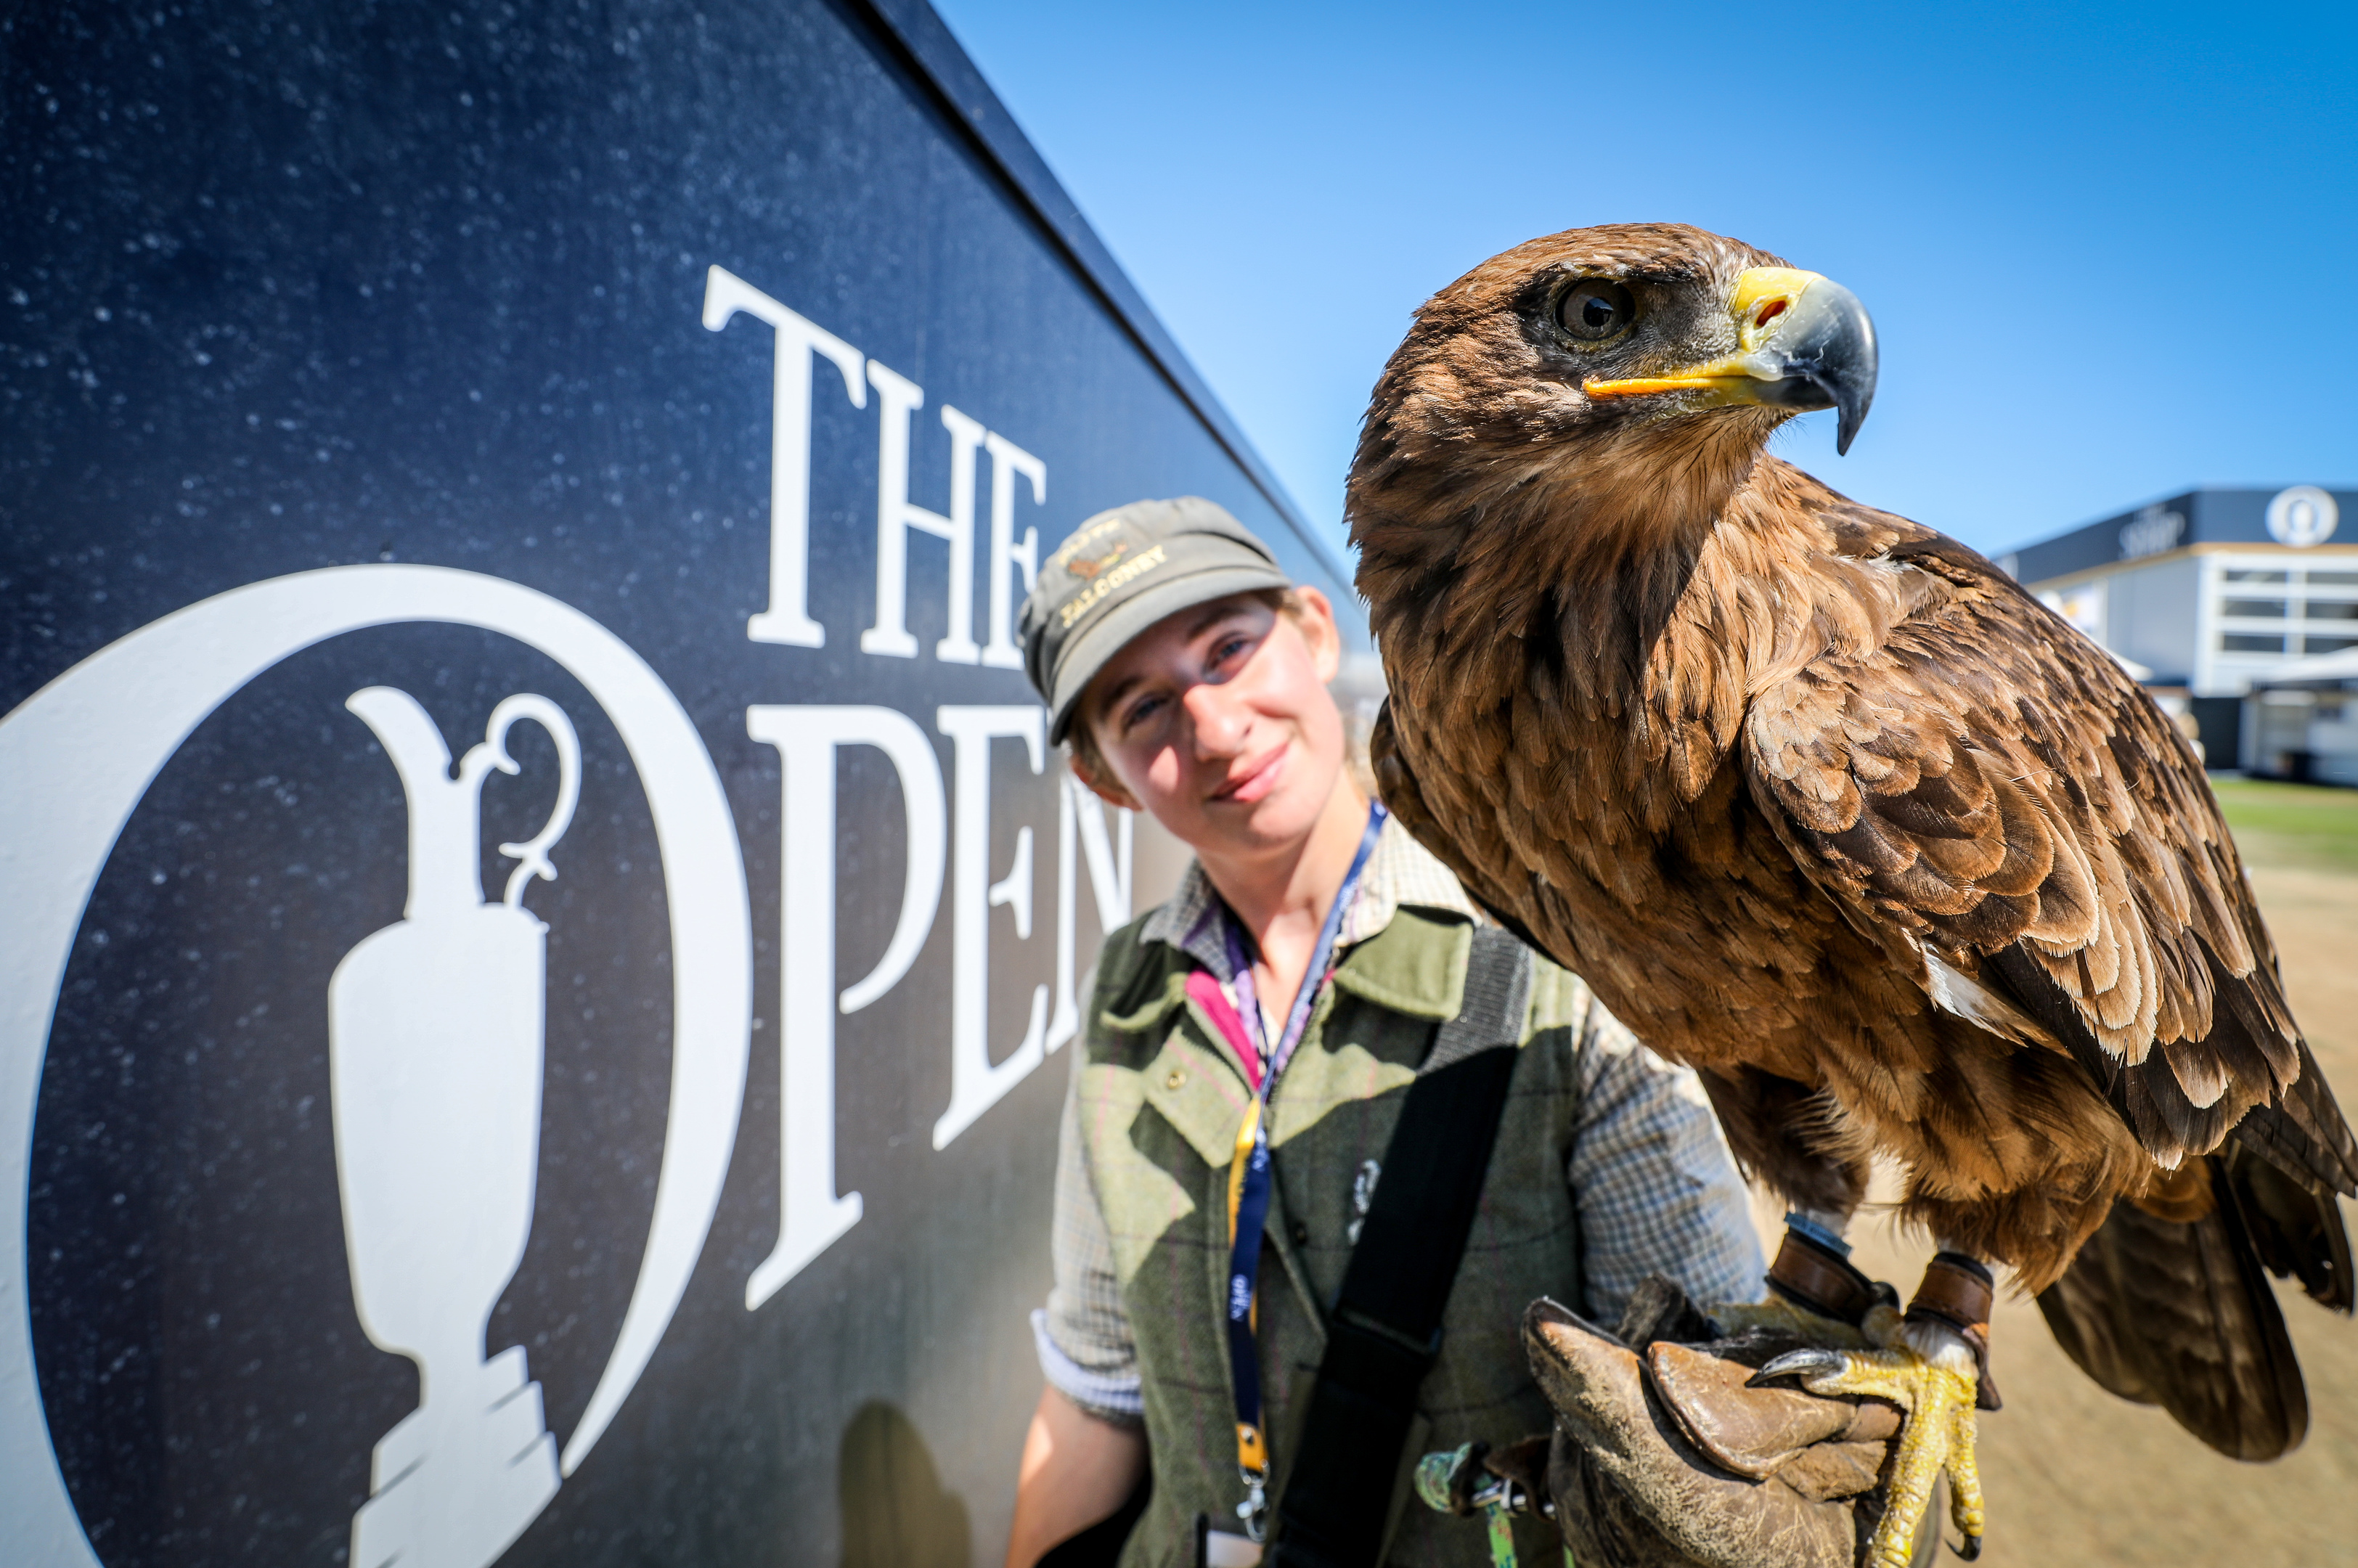 Rebecca McDougall with Fearnley the Tawny Eagle, both from Elite Falconry.